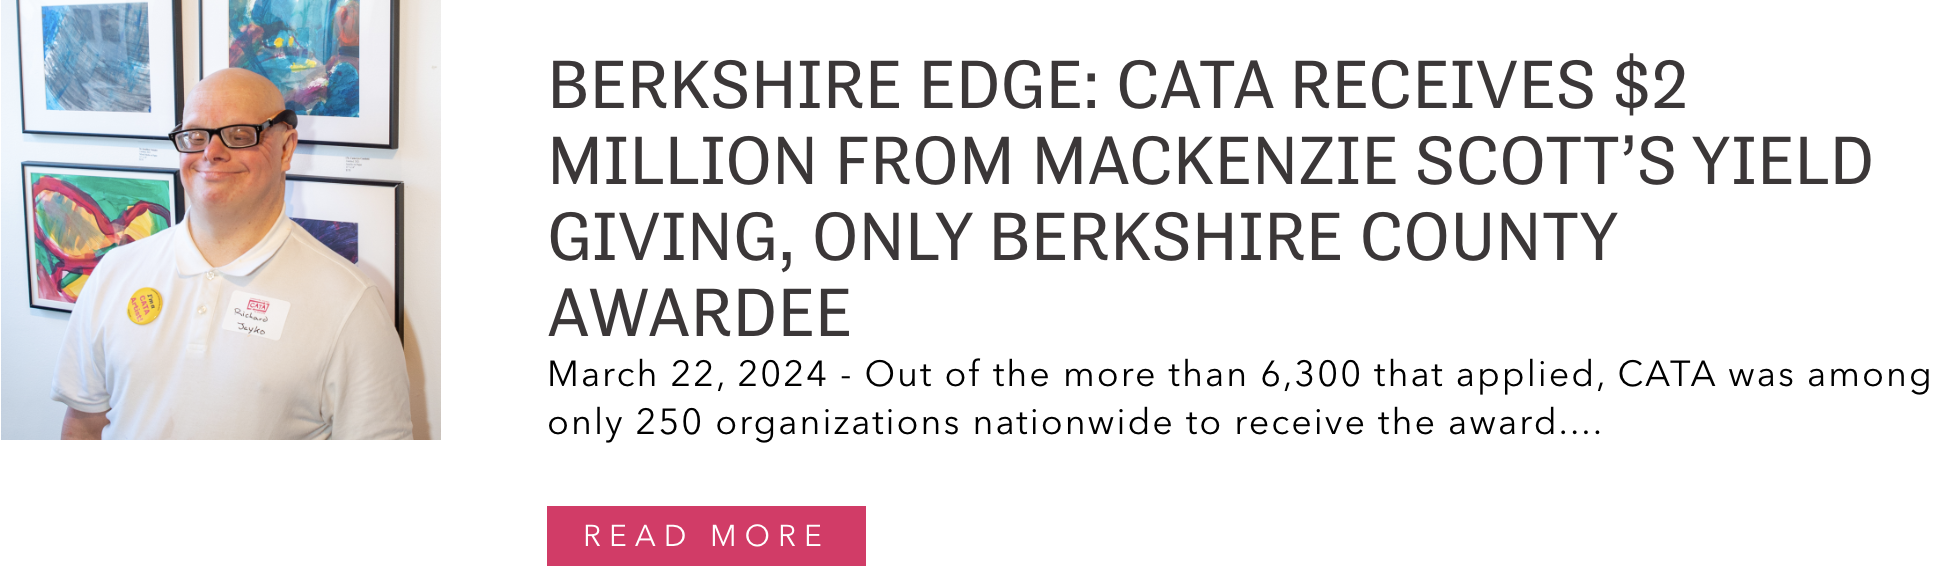 Link to Berkshire Edge article "CATA RECEIVES $2 MILLION FROM MACKENZIE SCOTT’S YIELD GIVING, ONLY BERKSHIRE COUNTY AWARDEE"